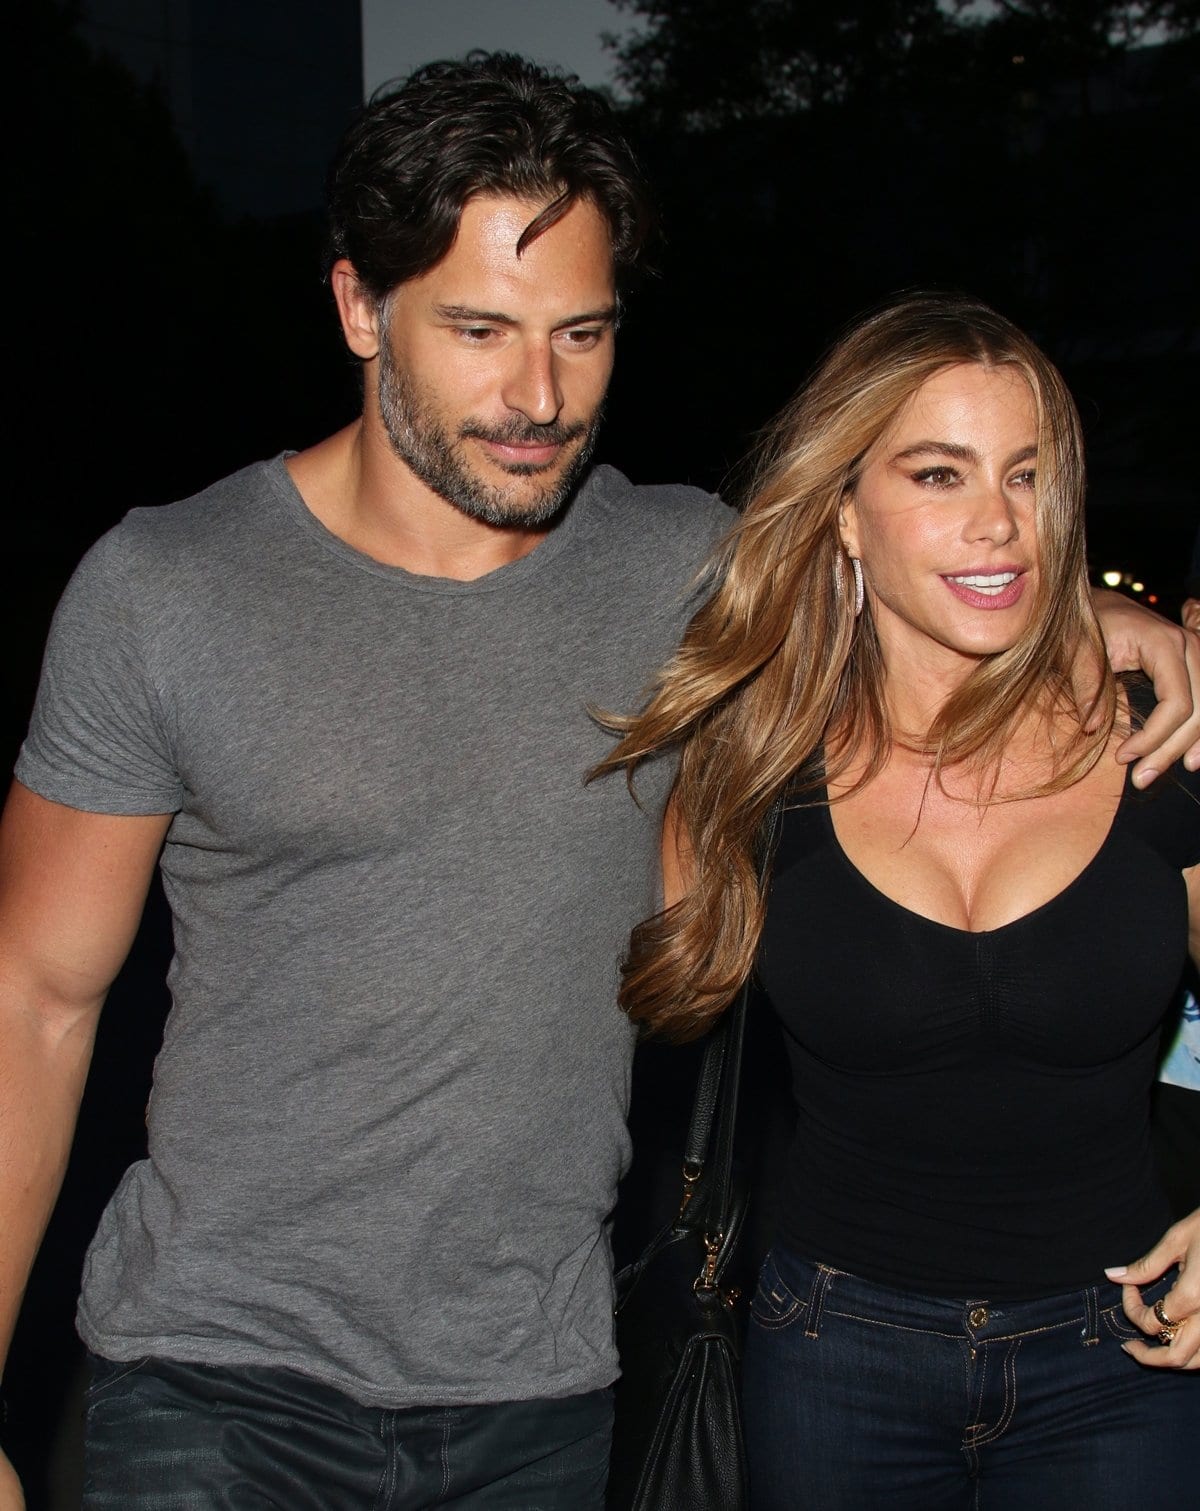 Joe Manganiello and Sofia Vergara started dating in the summer of 2014 and married in November 2015 in Palm Beach, Florida